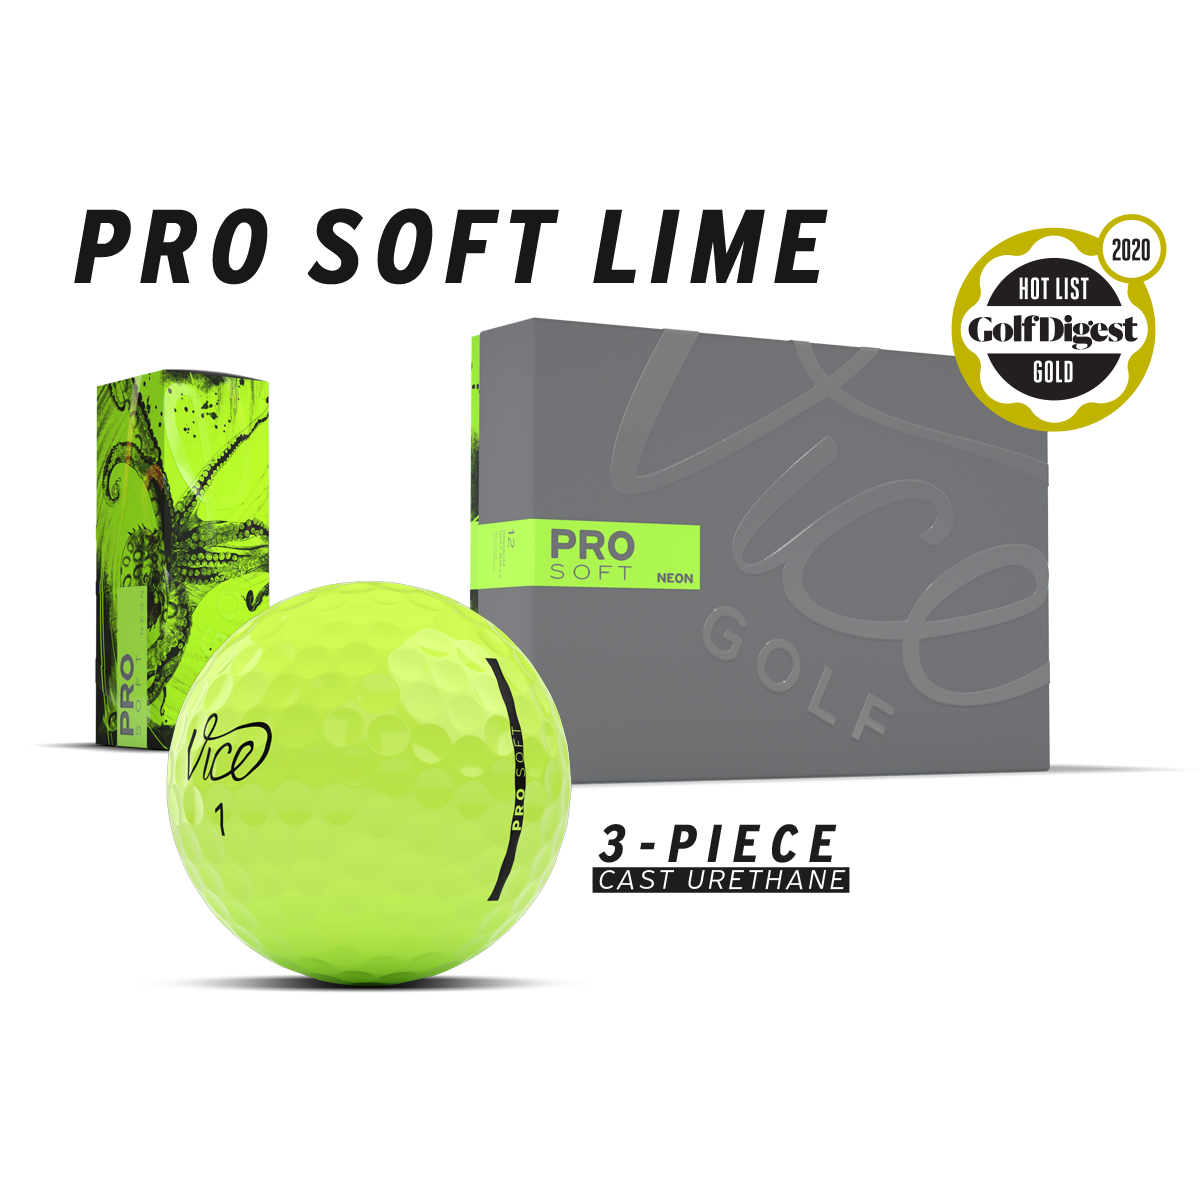 Pro Soft Lime package